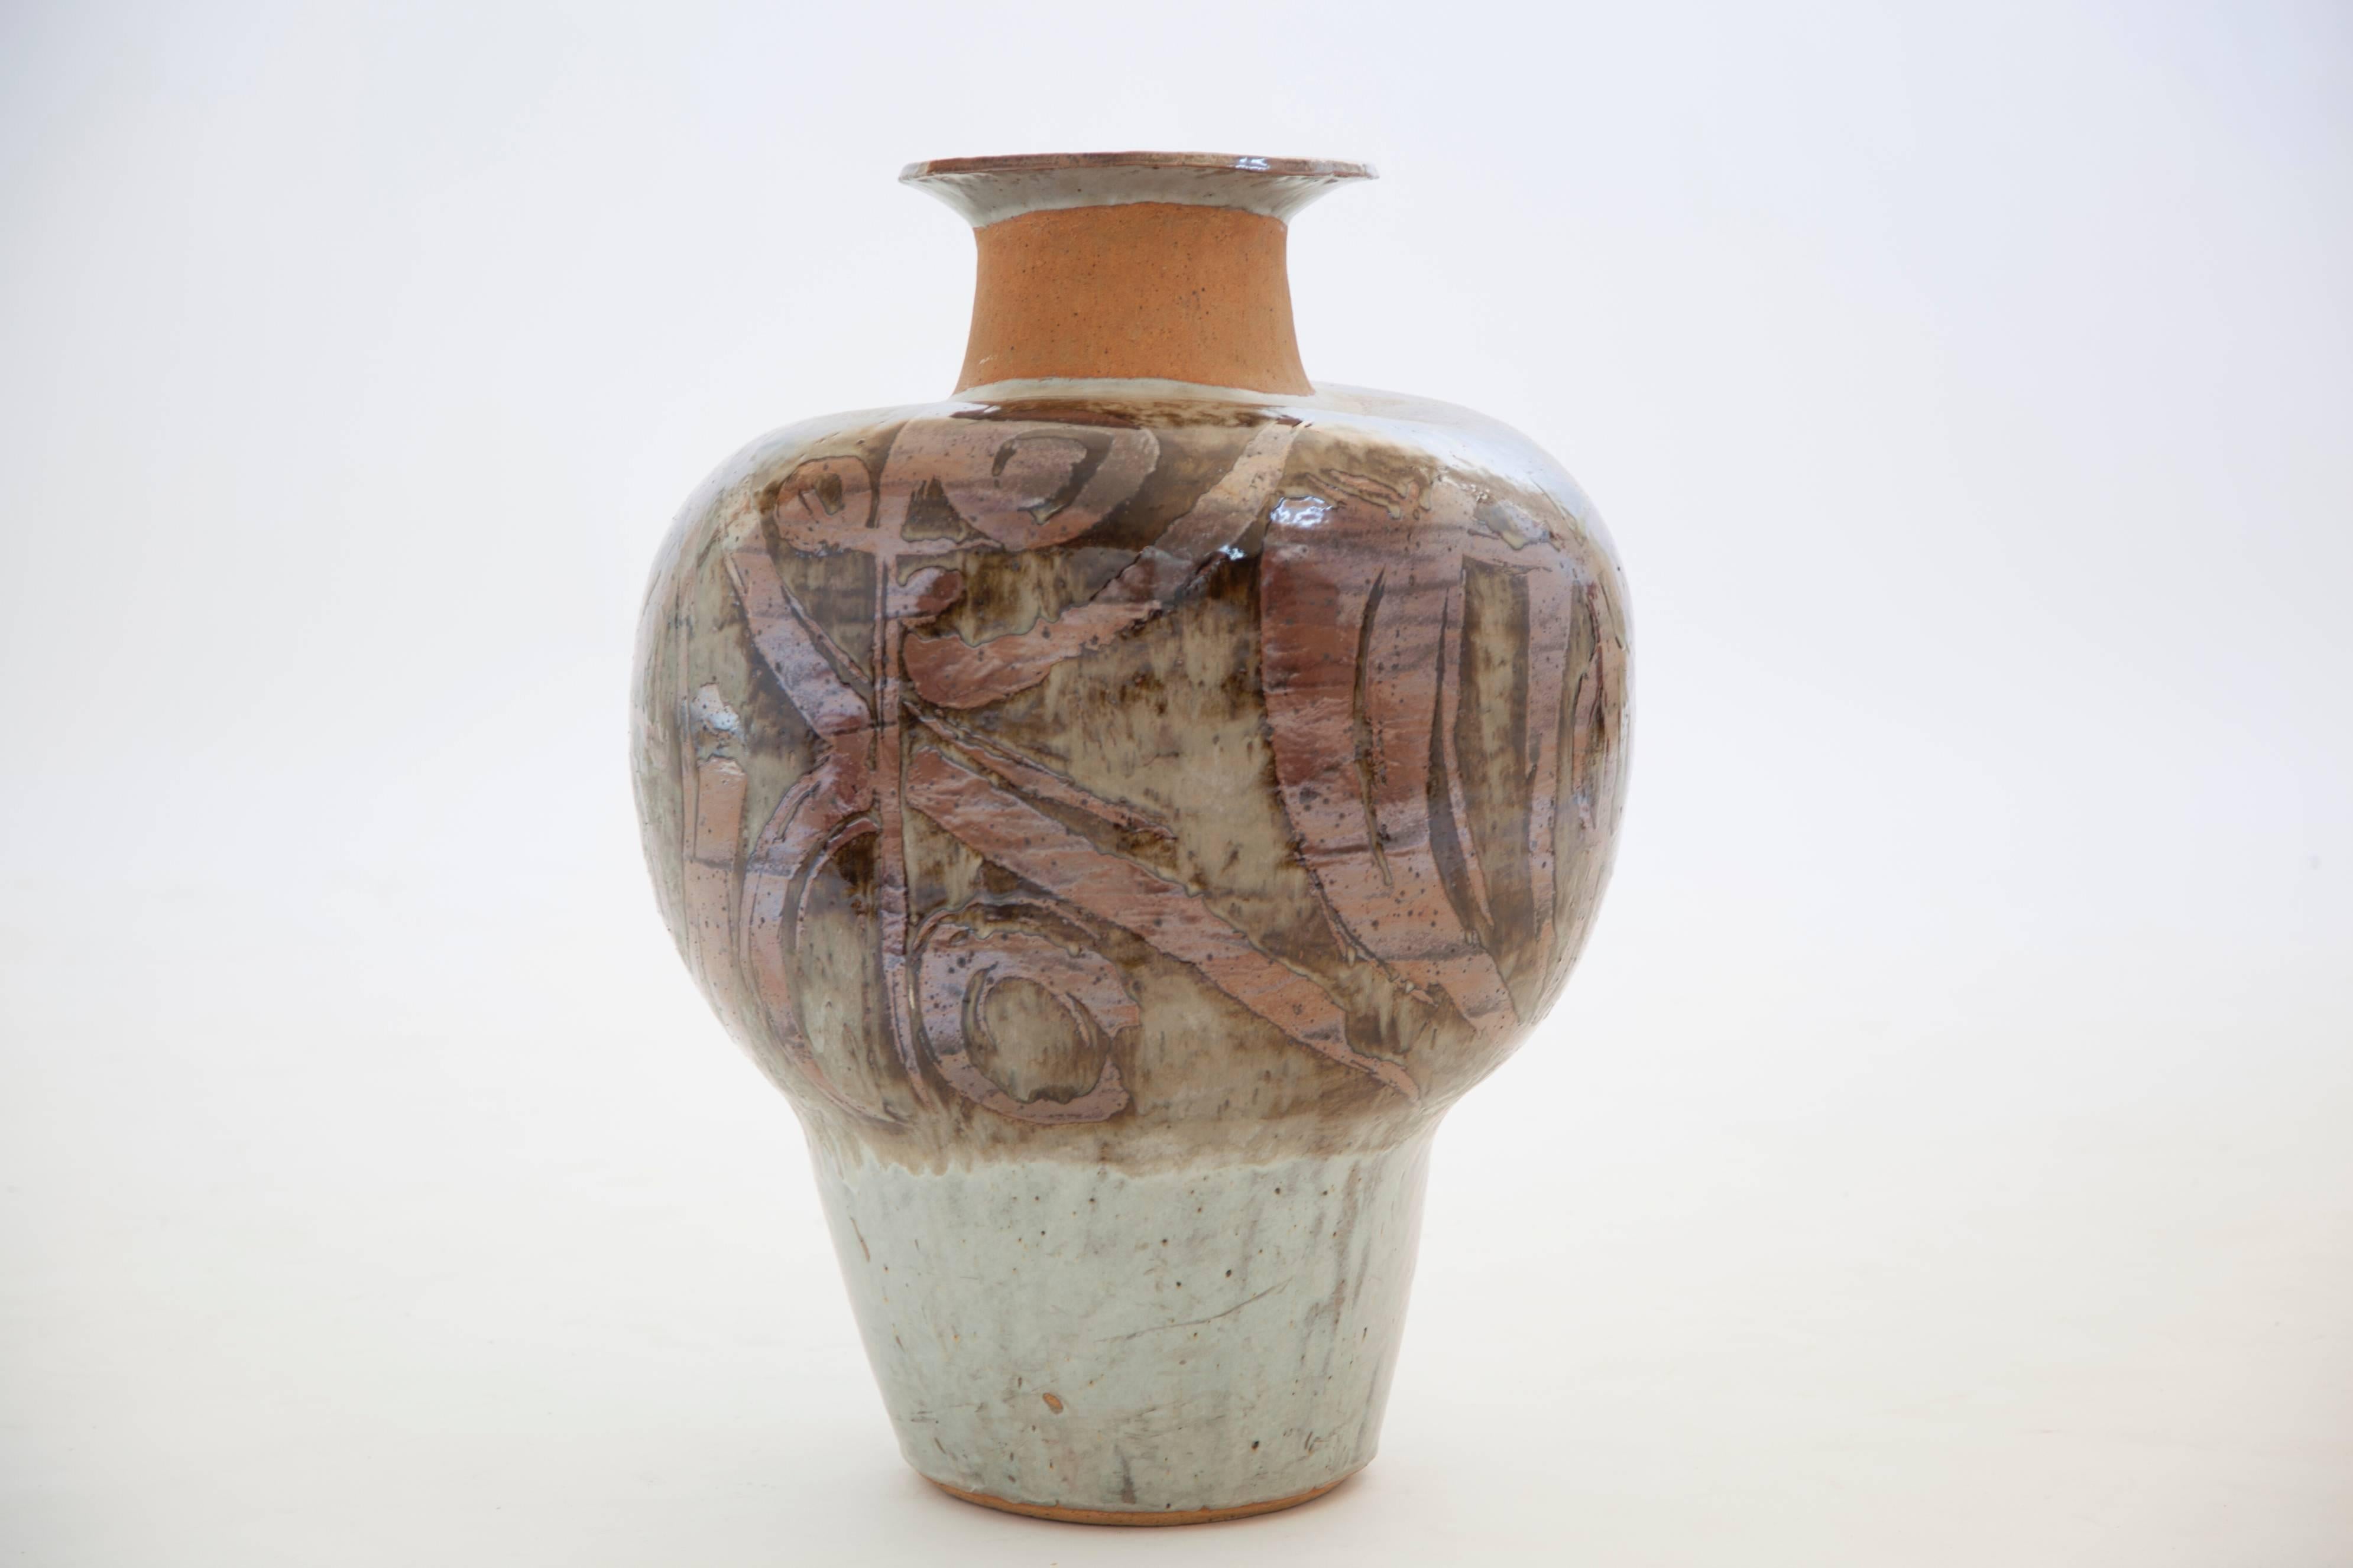 Ceramist Gerry Williams largest vase, Williams was born in 1926 in India, where his parents were American missionaries. It was during his childhood in Bengal that Williams had experiences that led him to clay. Influenced by, as the artist often